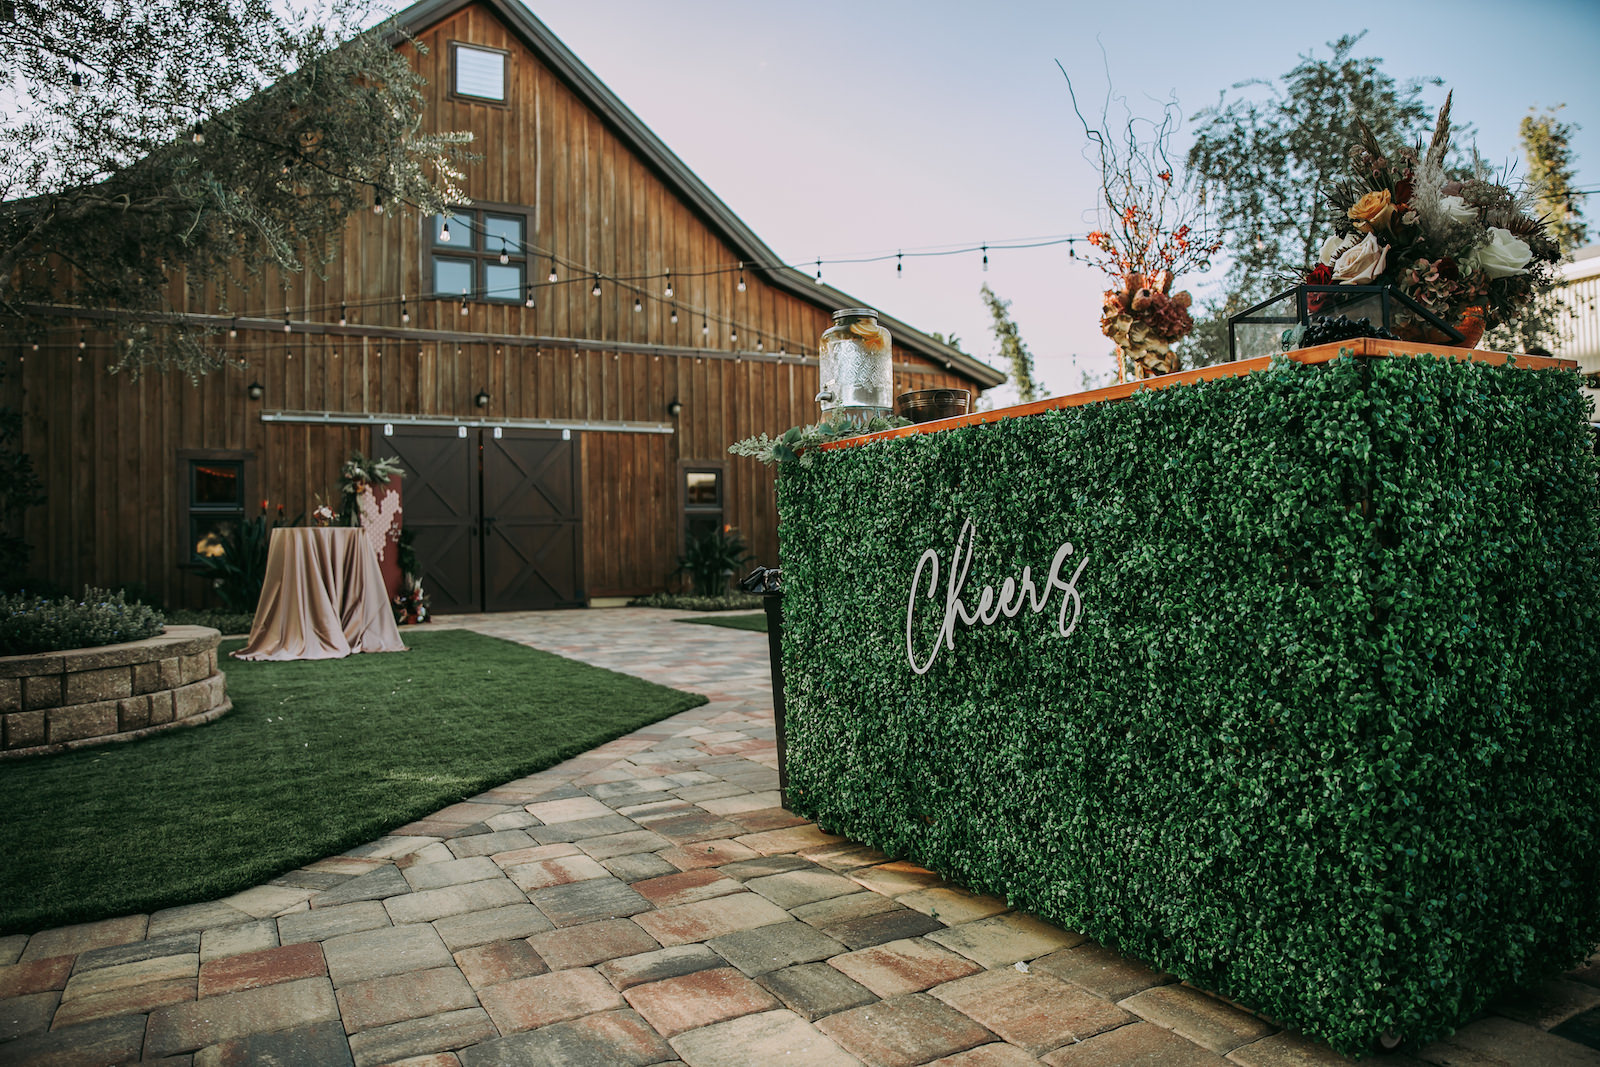 Rustic Barn Wedding Reception Decor, String Lights, Hedge Greenery Wall Bar with Laser Cut "Cheers", Lush Floral Arrangements | Tampa Bay Outdoor Wedding Venue Mision Lago Estate | Mision Lago Ranch